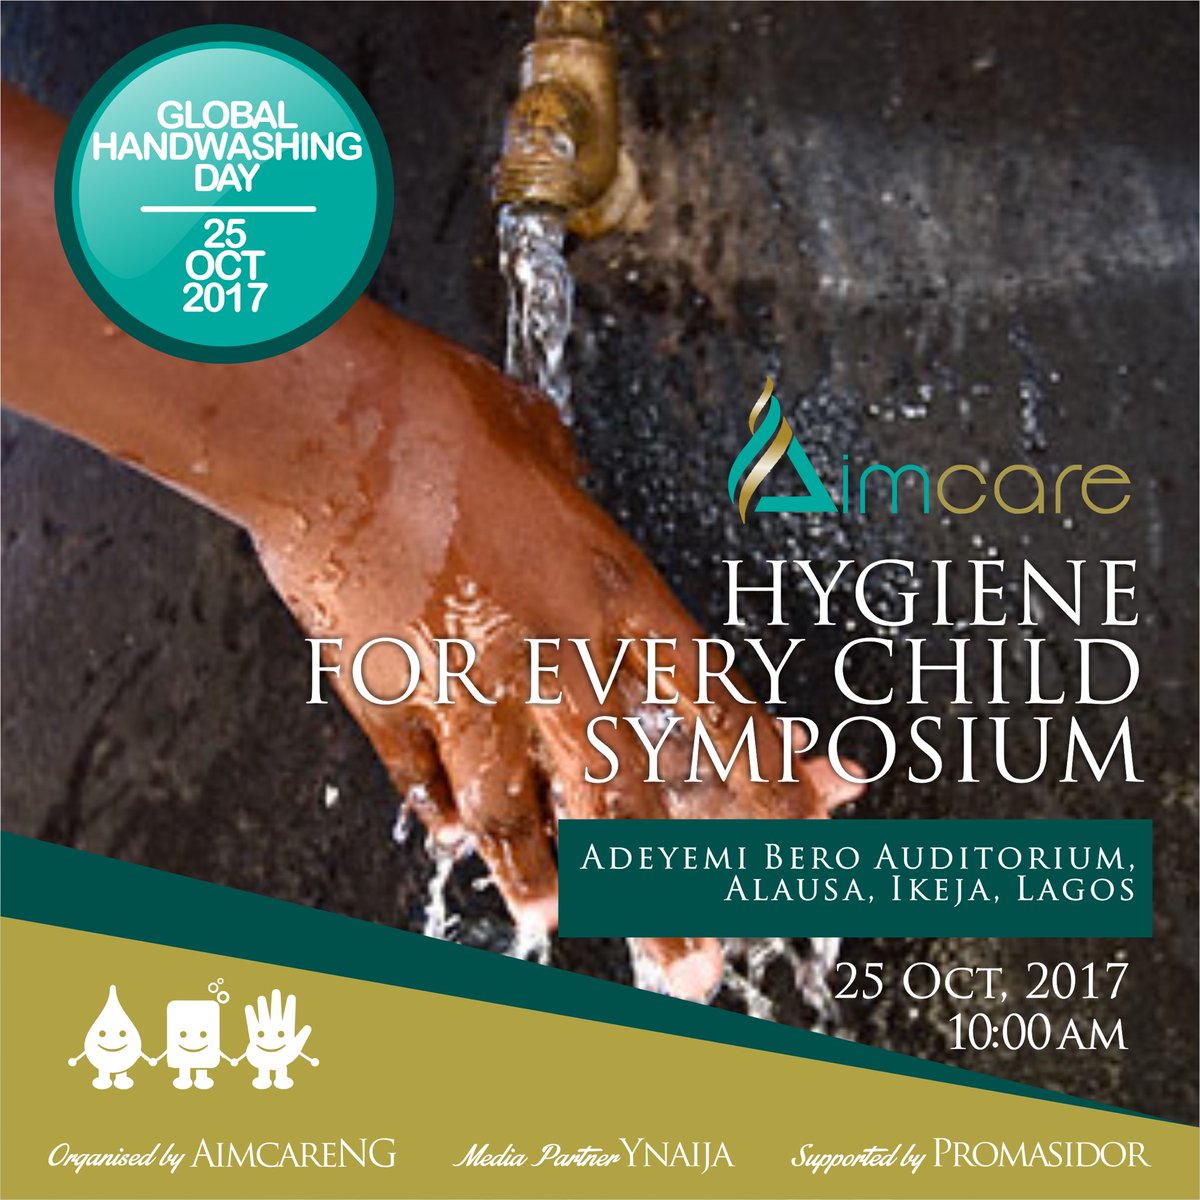 The count down!!

Every child is entitled to good hygiene.
Be a part of this.

#HygieneEducation
#SDG6
#WASH
#HandWashing
#SocEnt